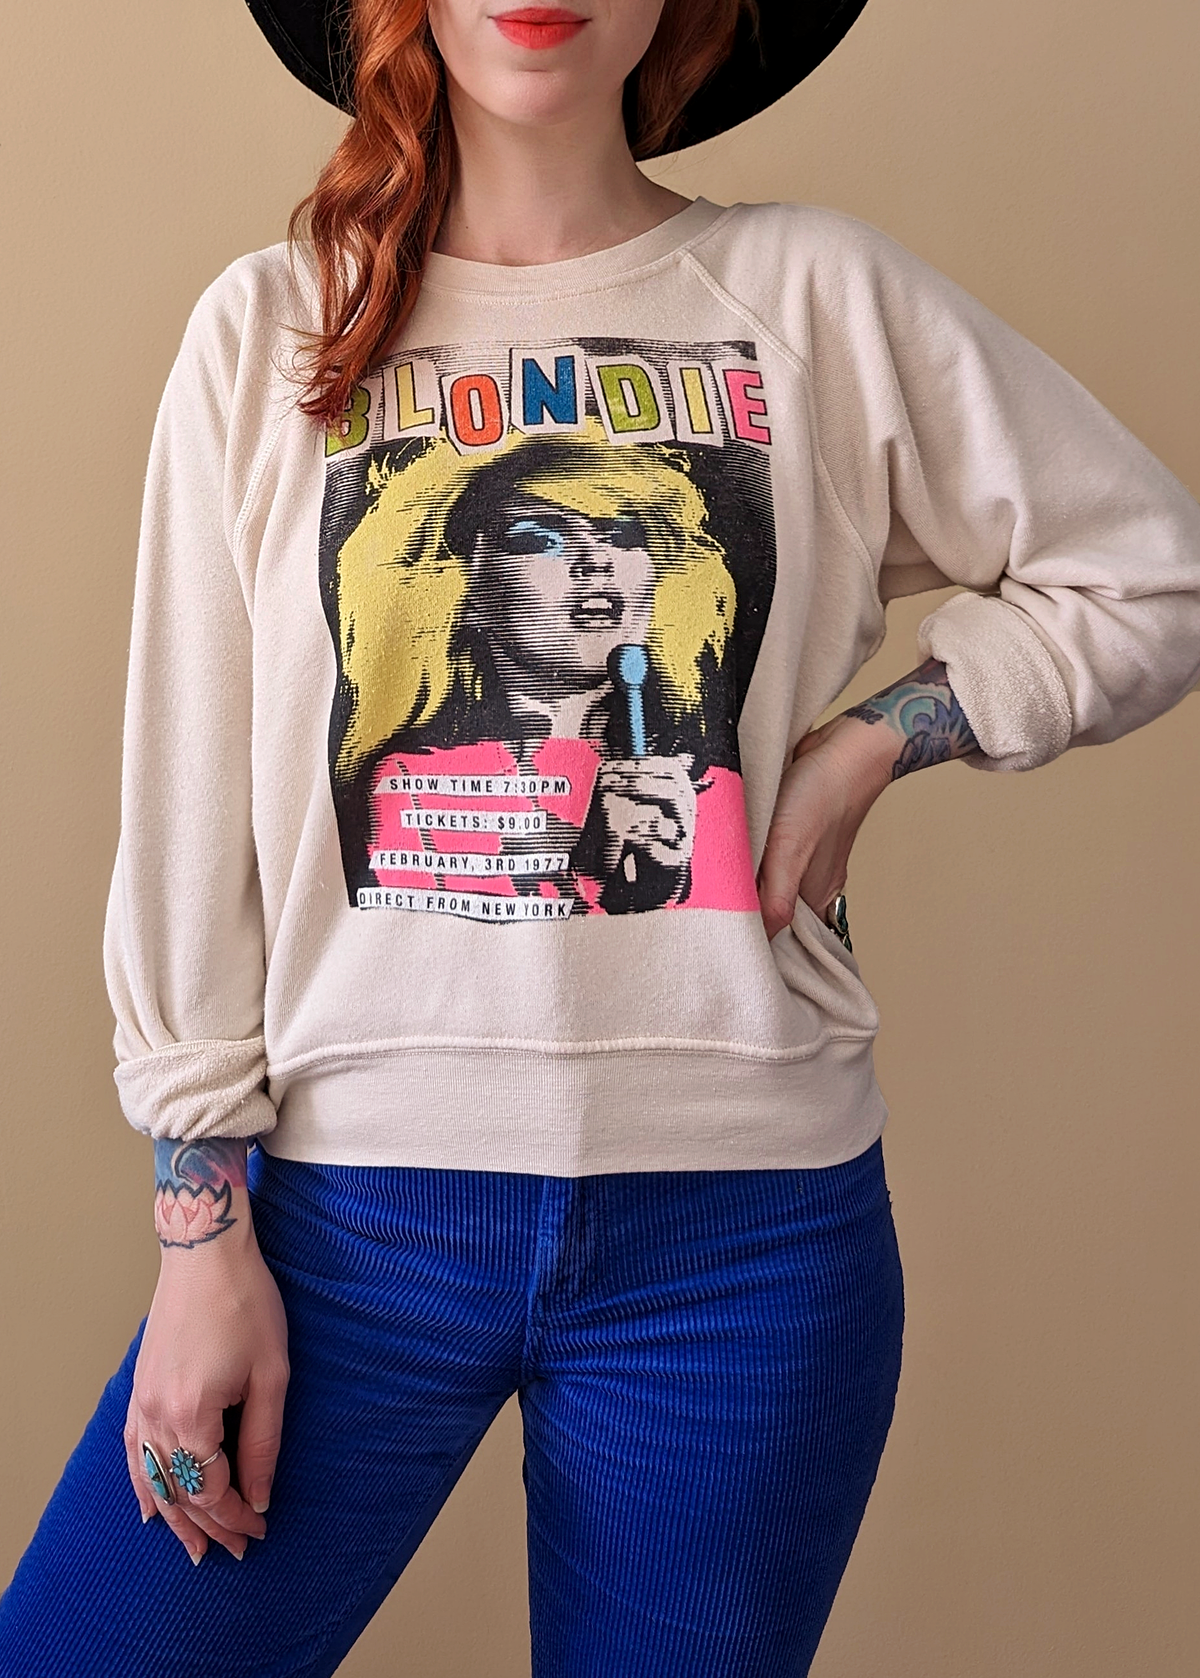 Daydreamer LA Cream Dirty White Raglan Crew Neck Sweatshirt with colorful Blondie 1977 Showtime graphics at front, made in California and officially licensed